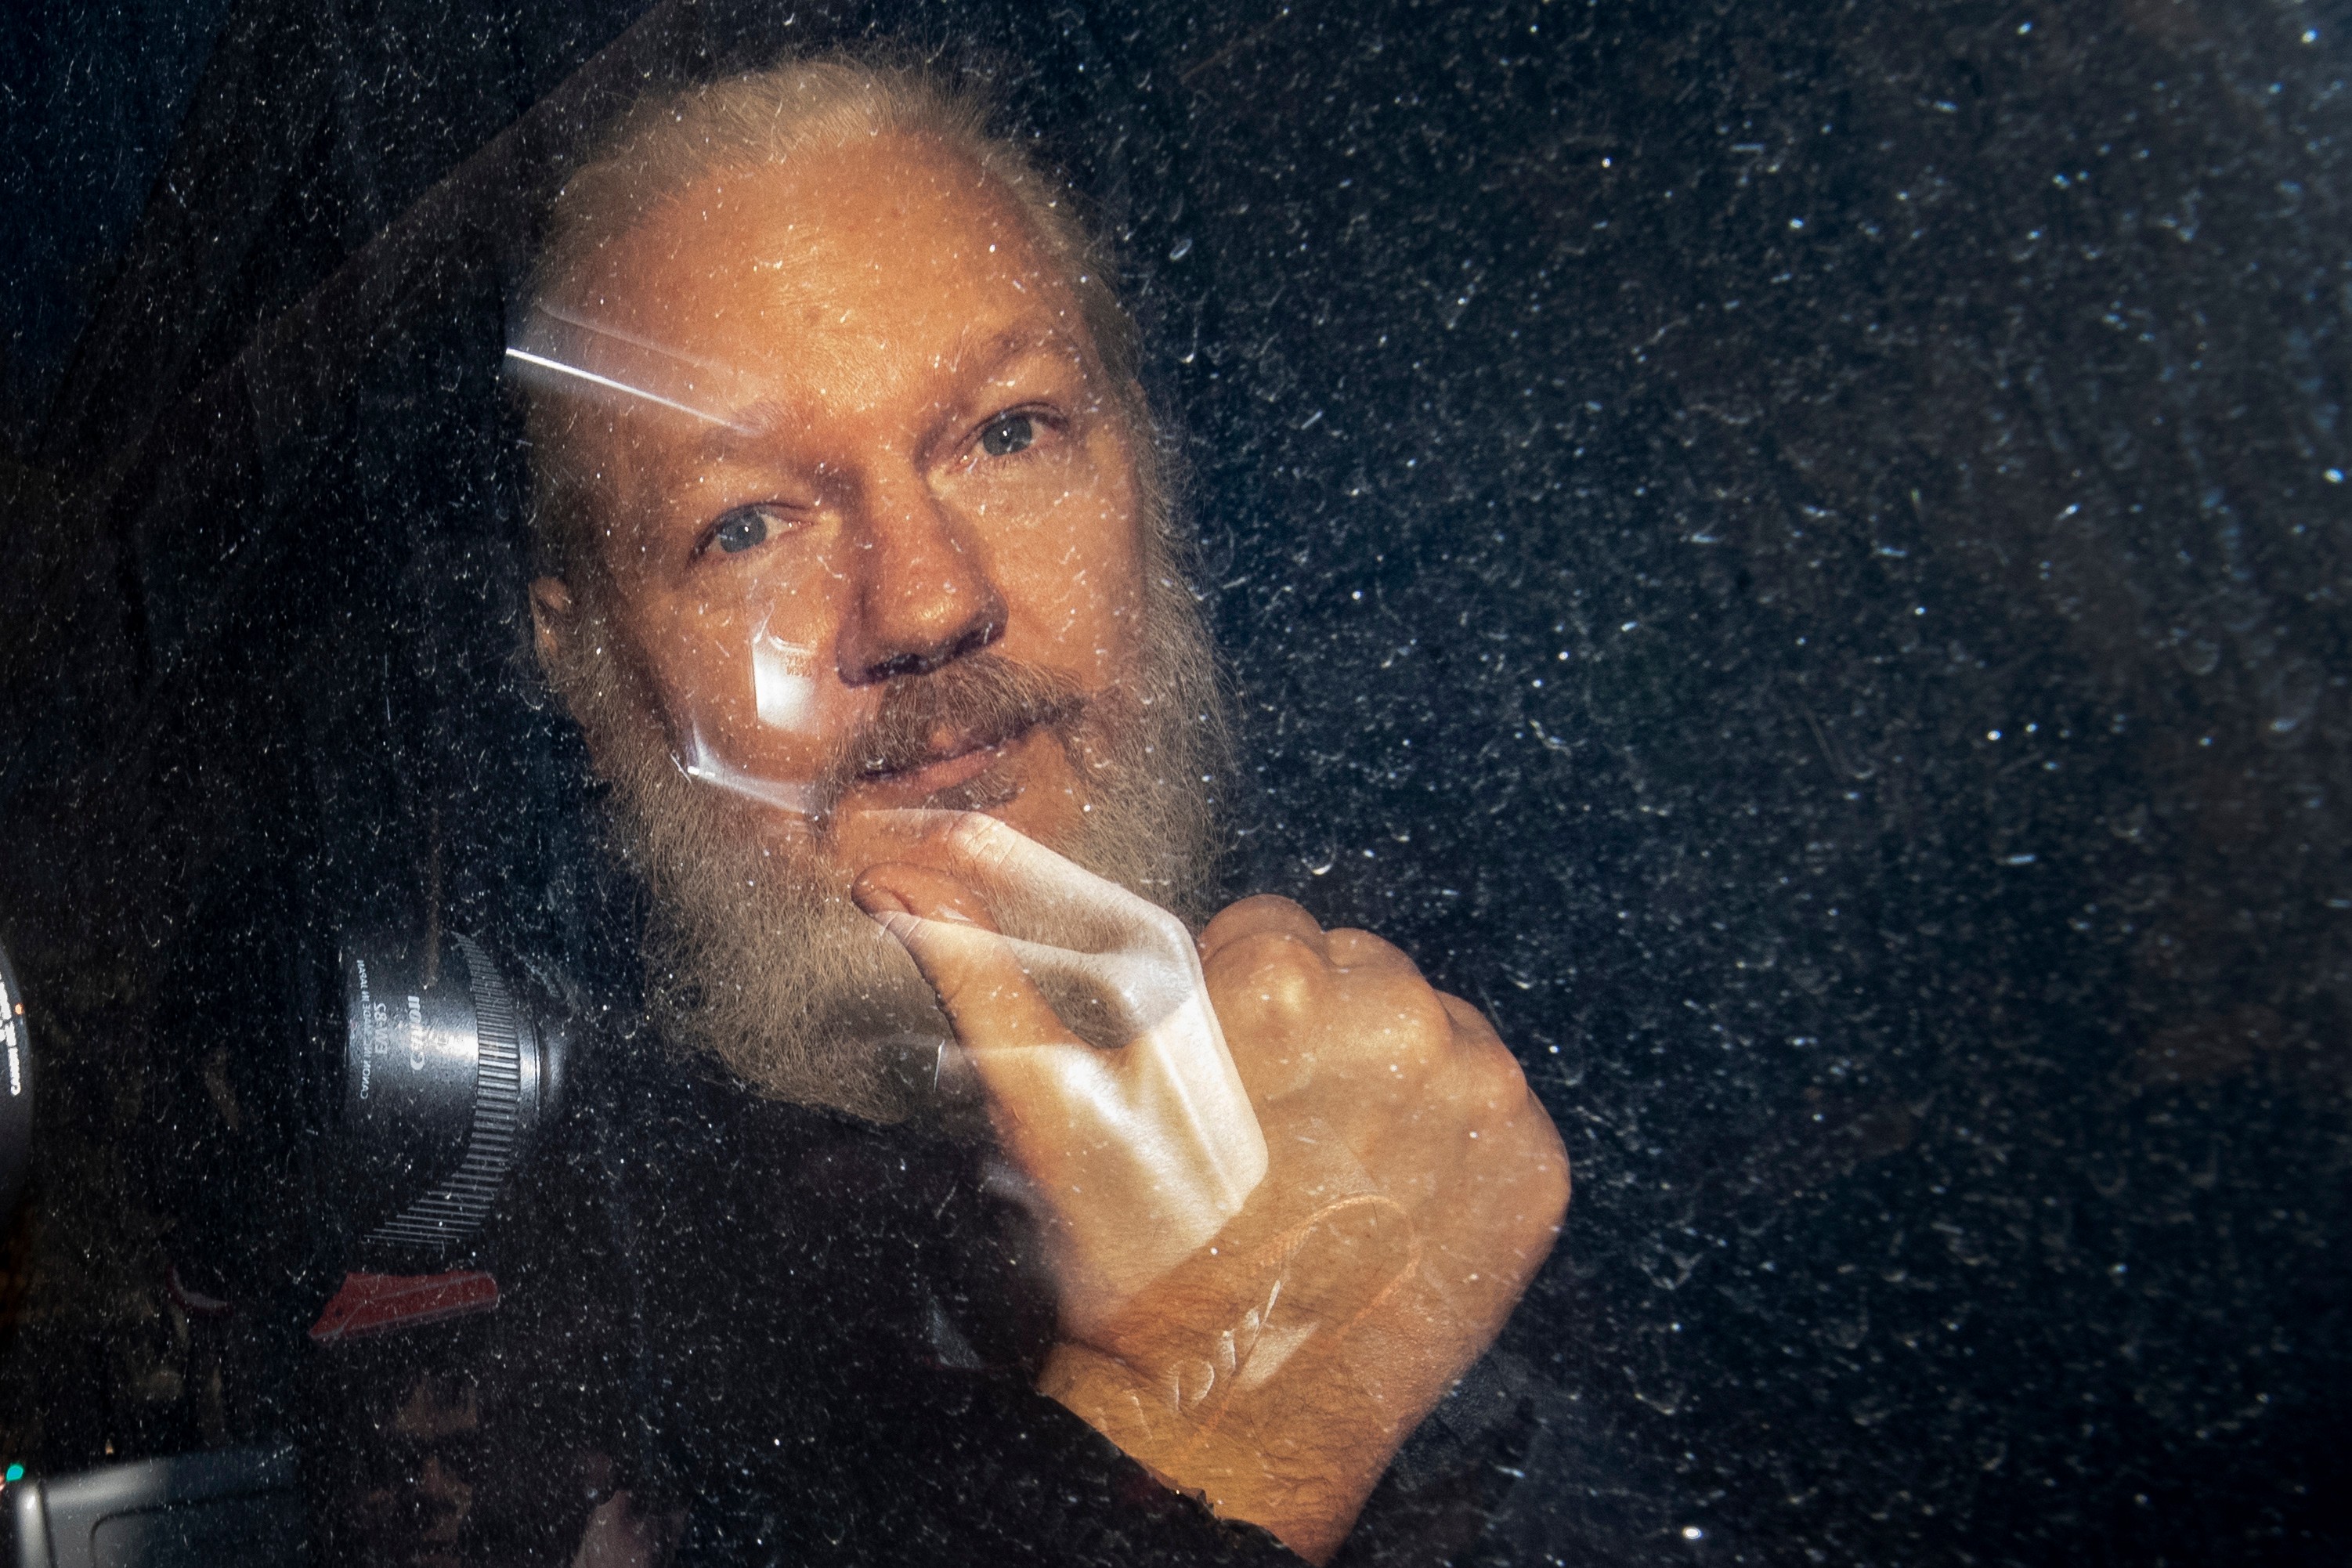 Does Julian Assange Have a Roommate in Jail? A VICE News Investigation